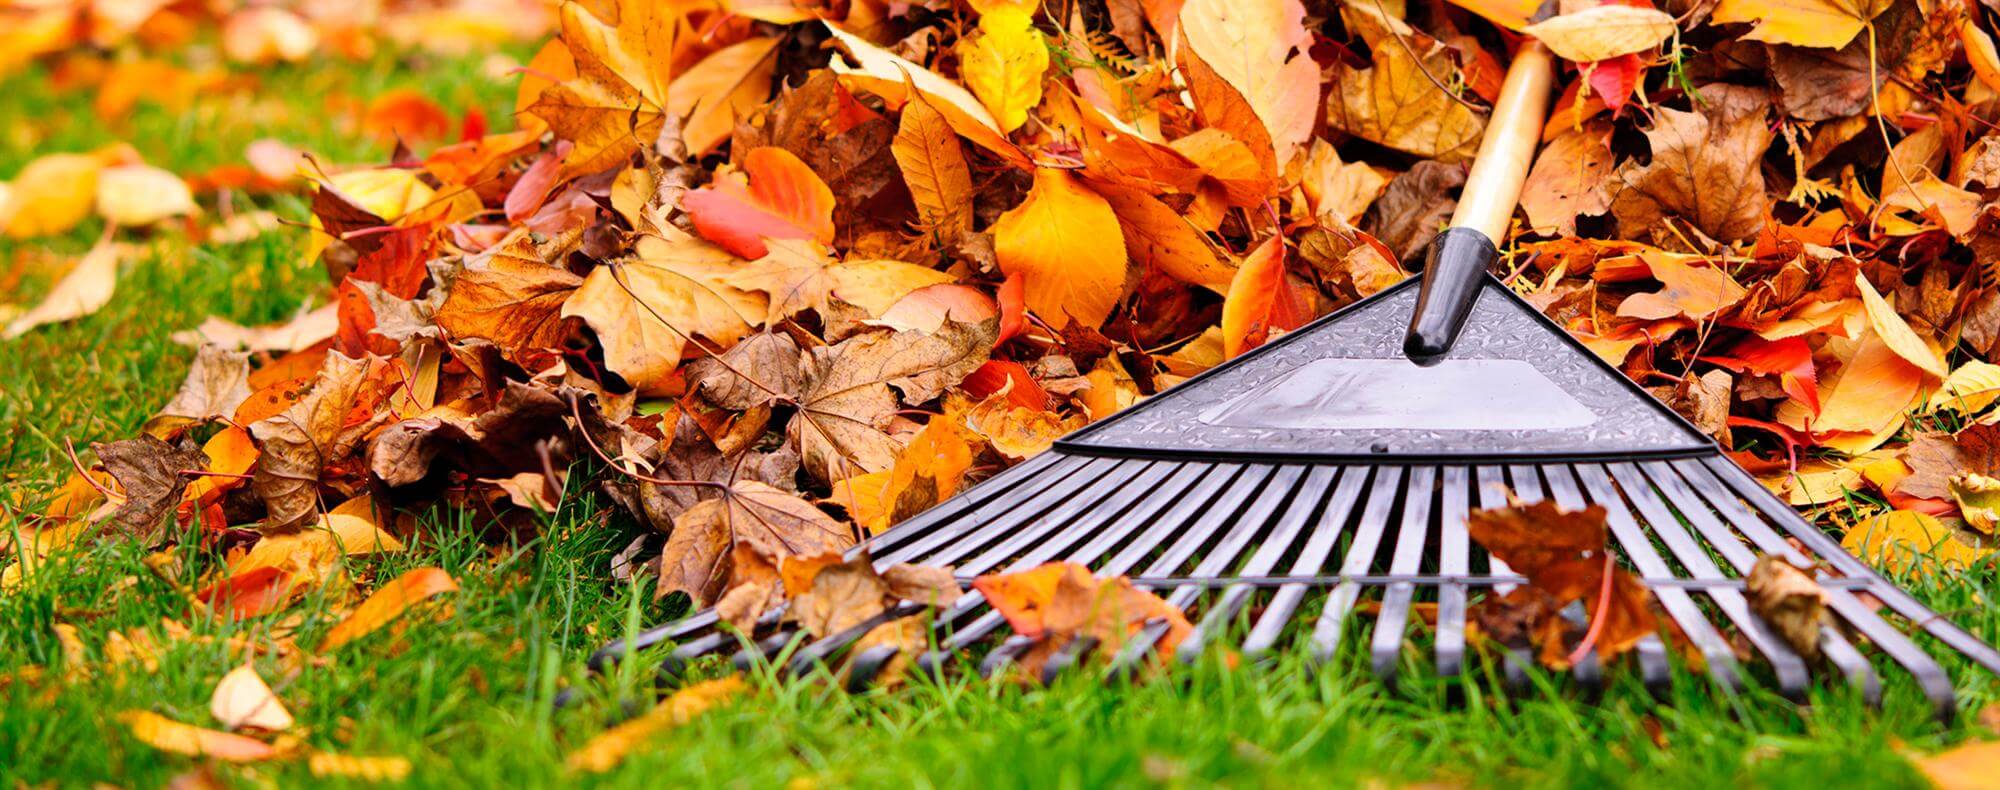 Yard Work Services in Southeast Wisconsin